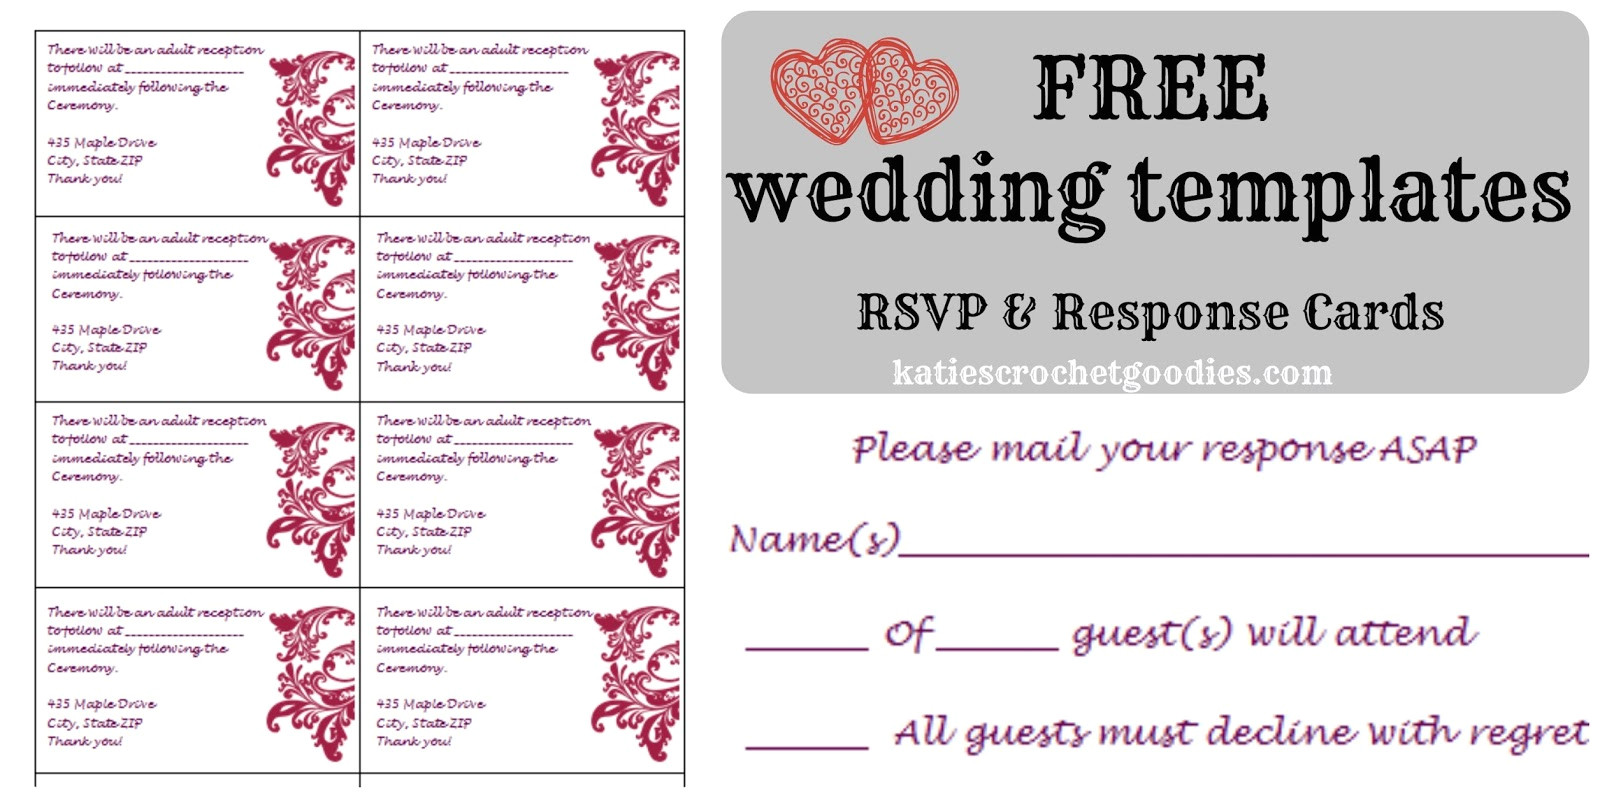 Rsvp Cards for Weddings Templates Free Wedding Templates Rsvp Reception Cards Katie 39 S